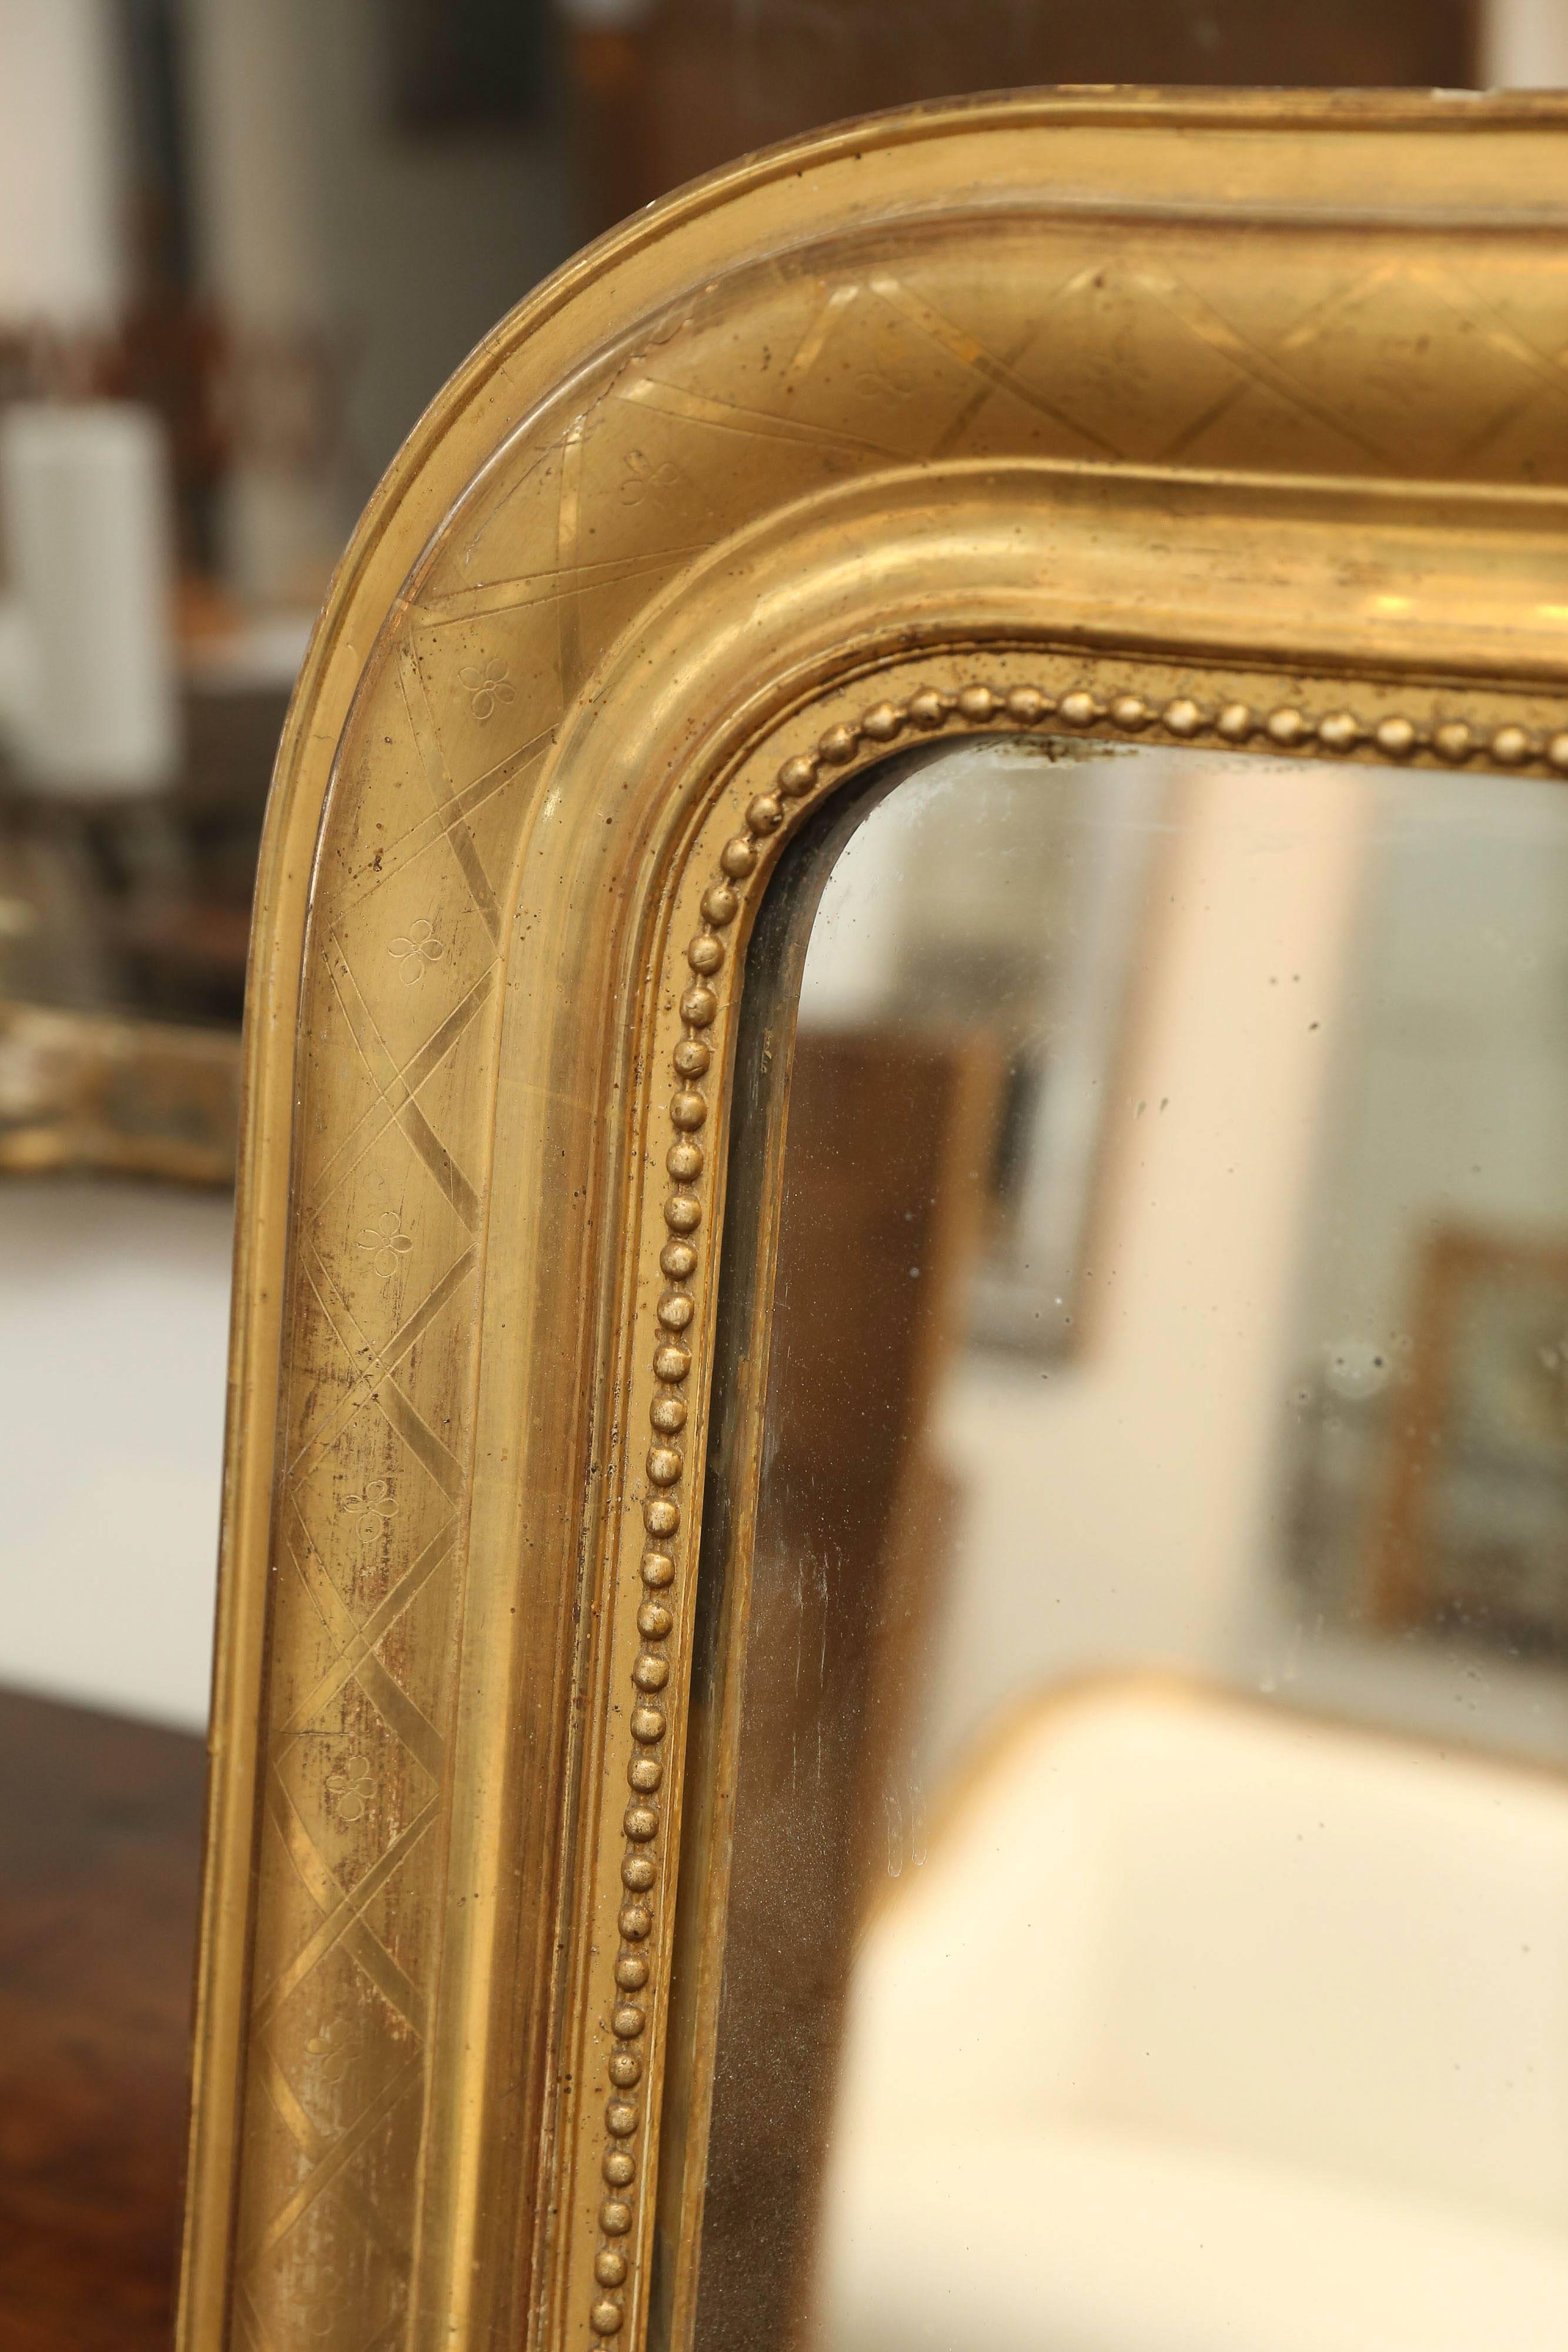 Antique large 19th century Louis Philippe mirror with pearls around the entire inside perimeter and a criss-cross lattice pattern around the larger border. Beautiful gilt patina. Original mercury glass.